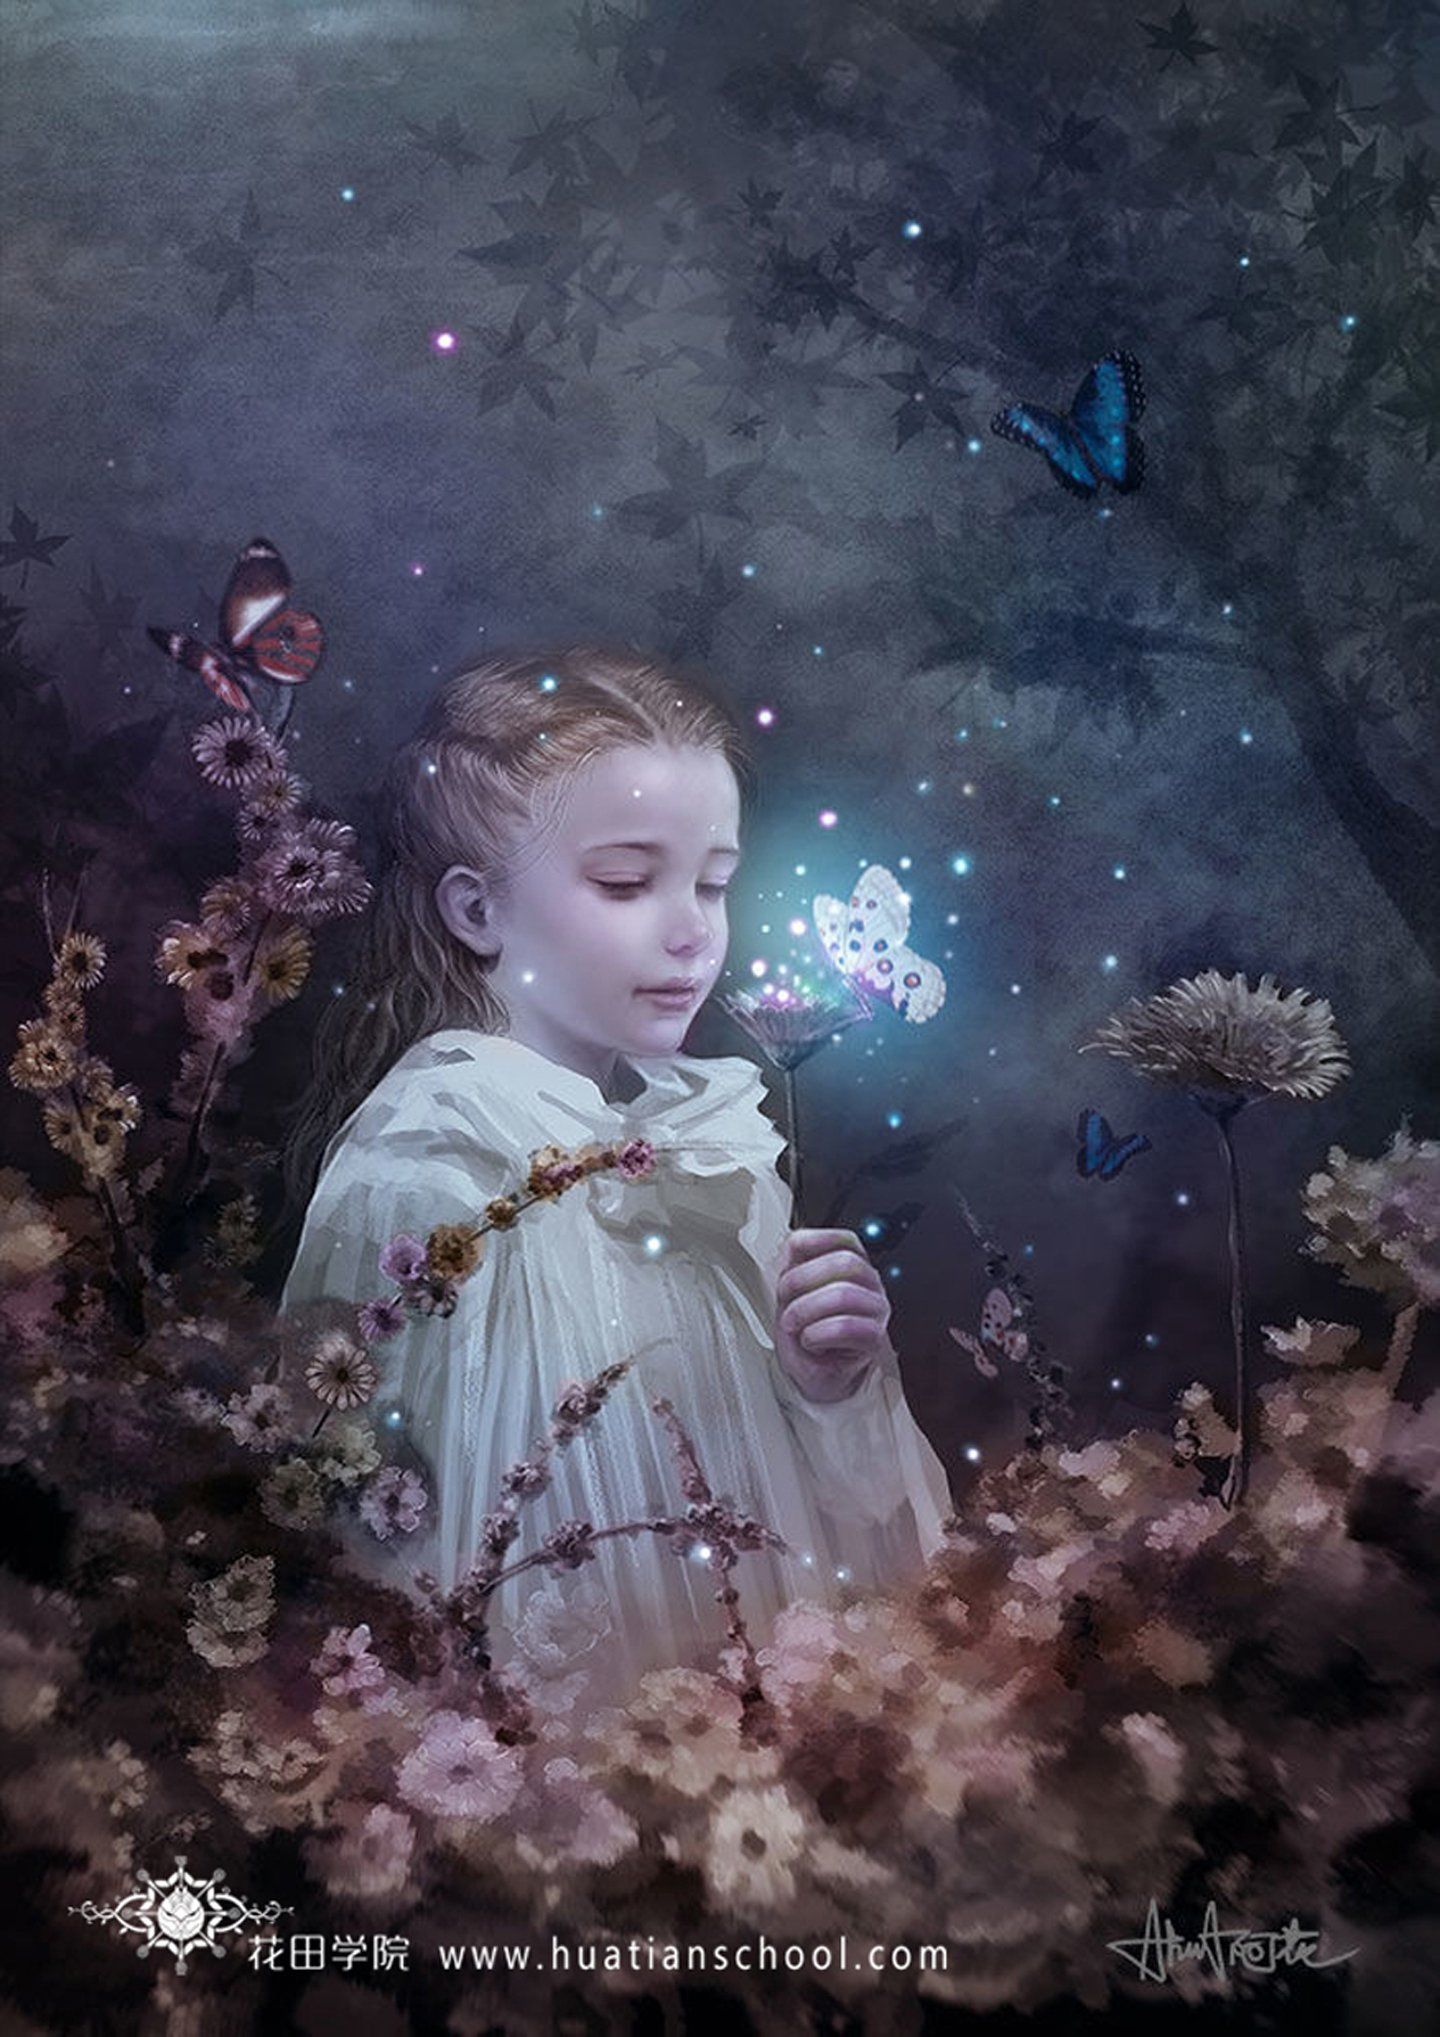 fantasy, Girl, Dress, Flowers, Rose, Beautiful, Forest, Child, Butterfly Wallpaper HD / Desktop and Mobile Background